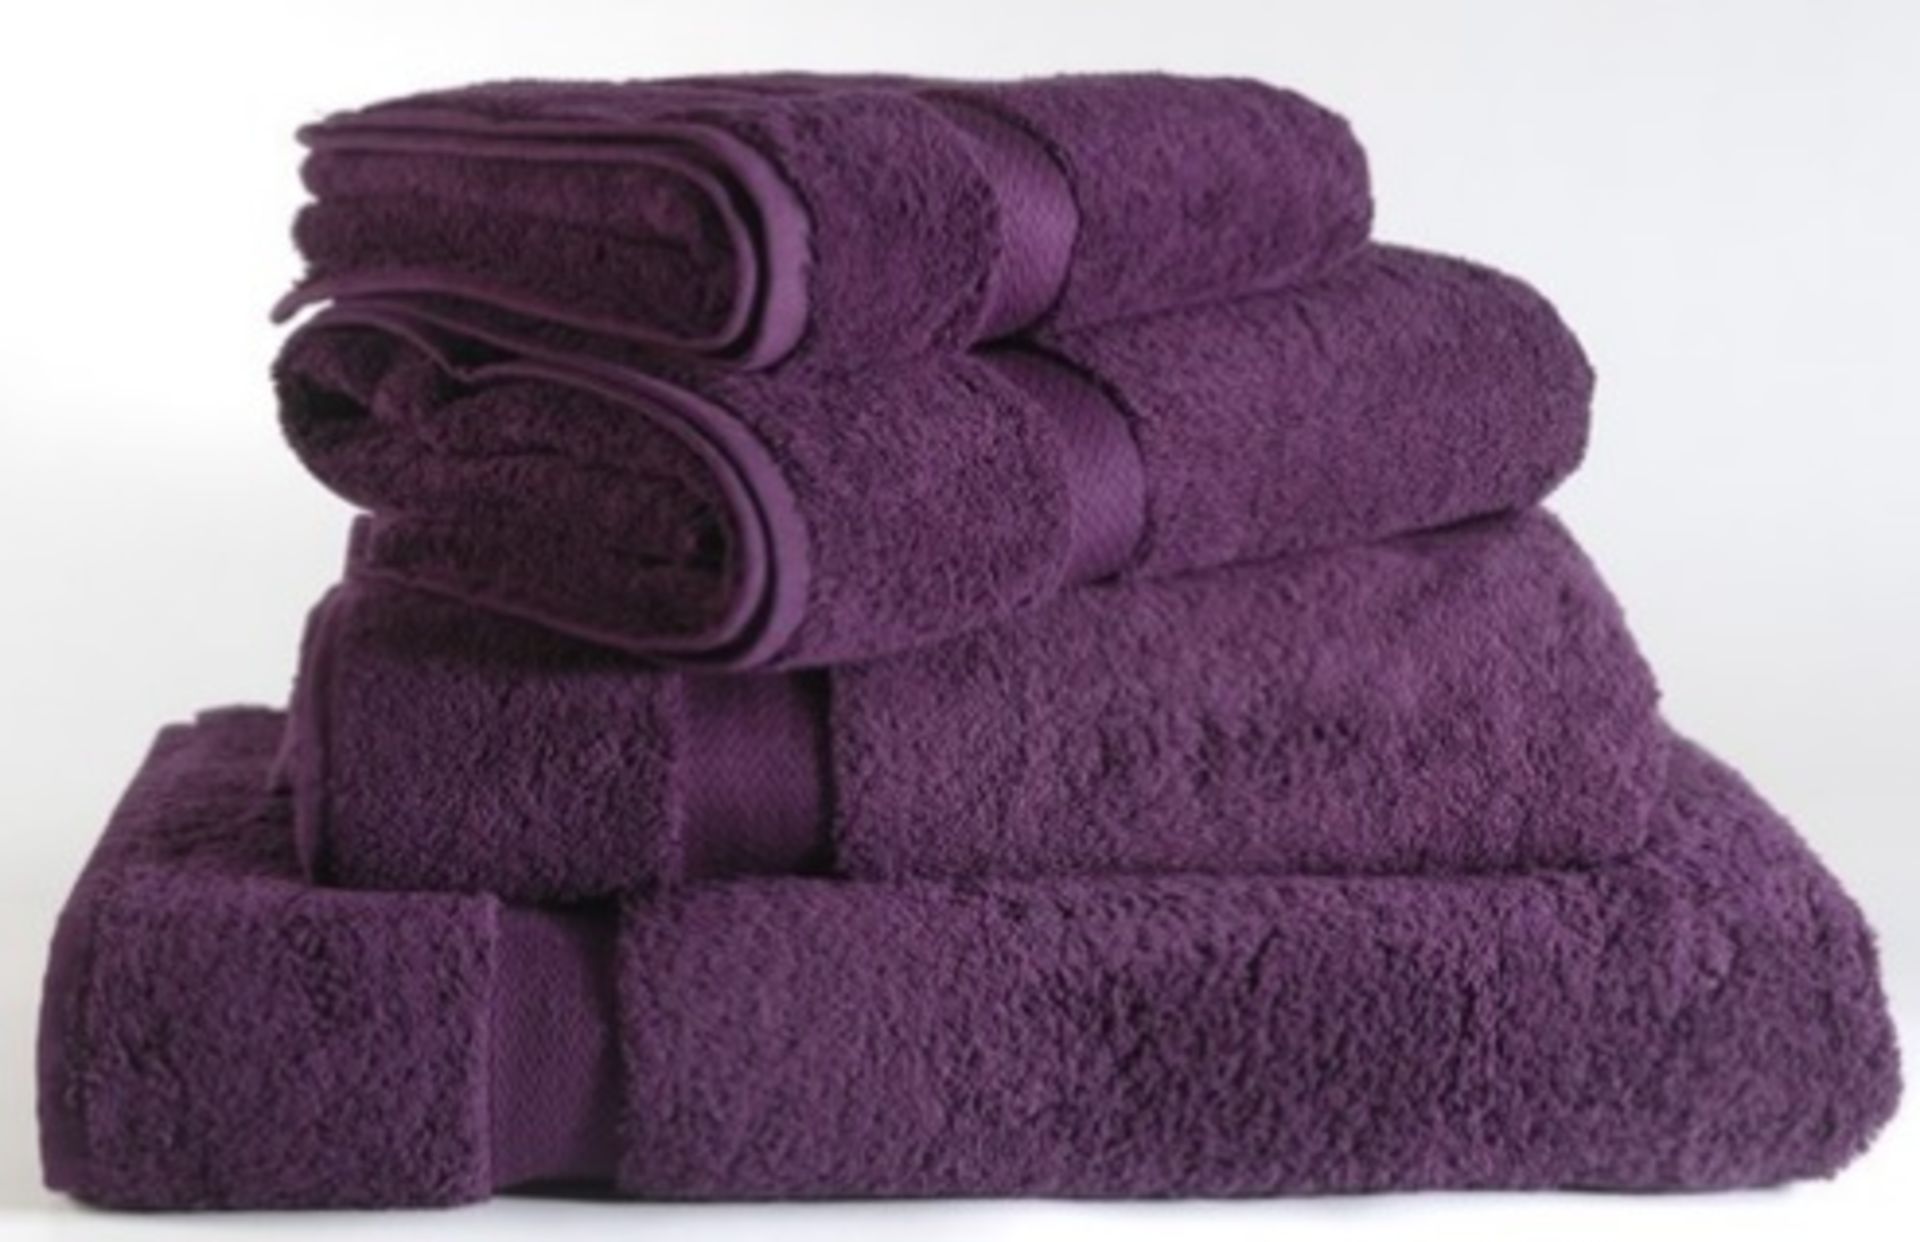 40 x Majestic Luxury 620gsm Bath Towels in Purple - Size SMALL - RRP £240 - CL587 - Location: Altrin